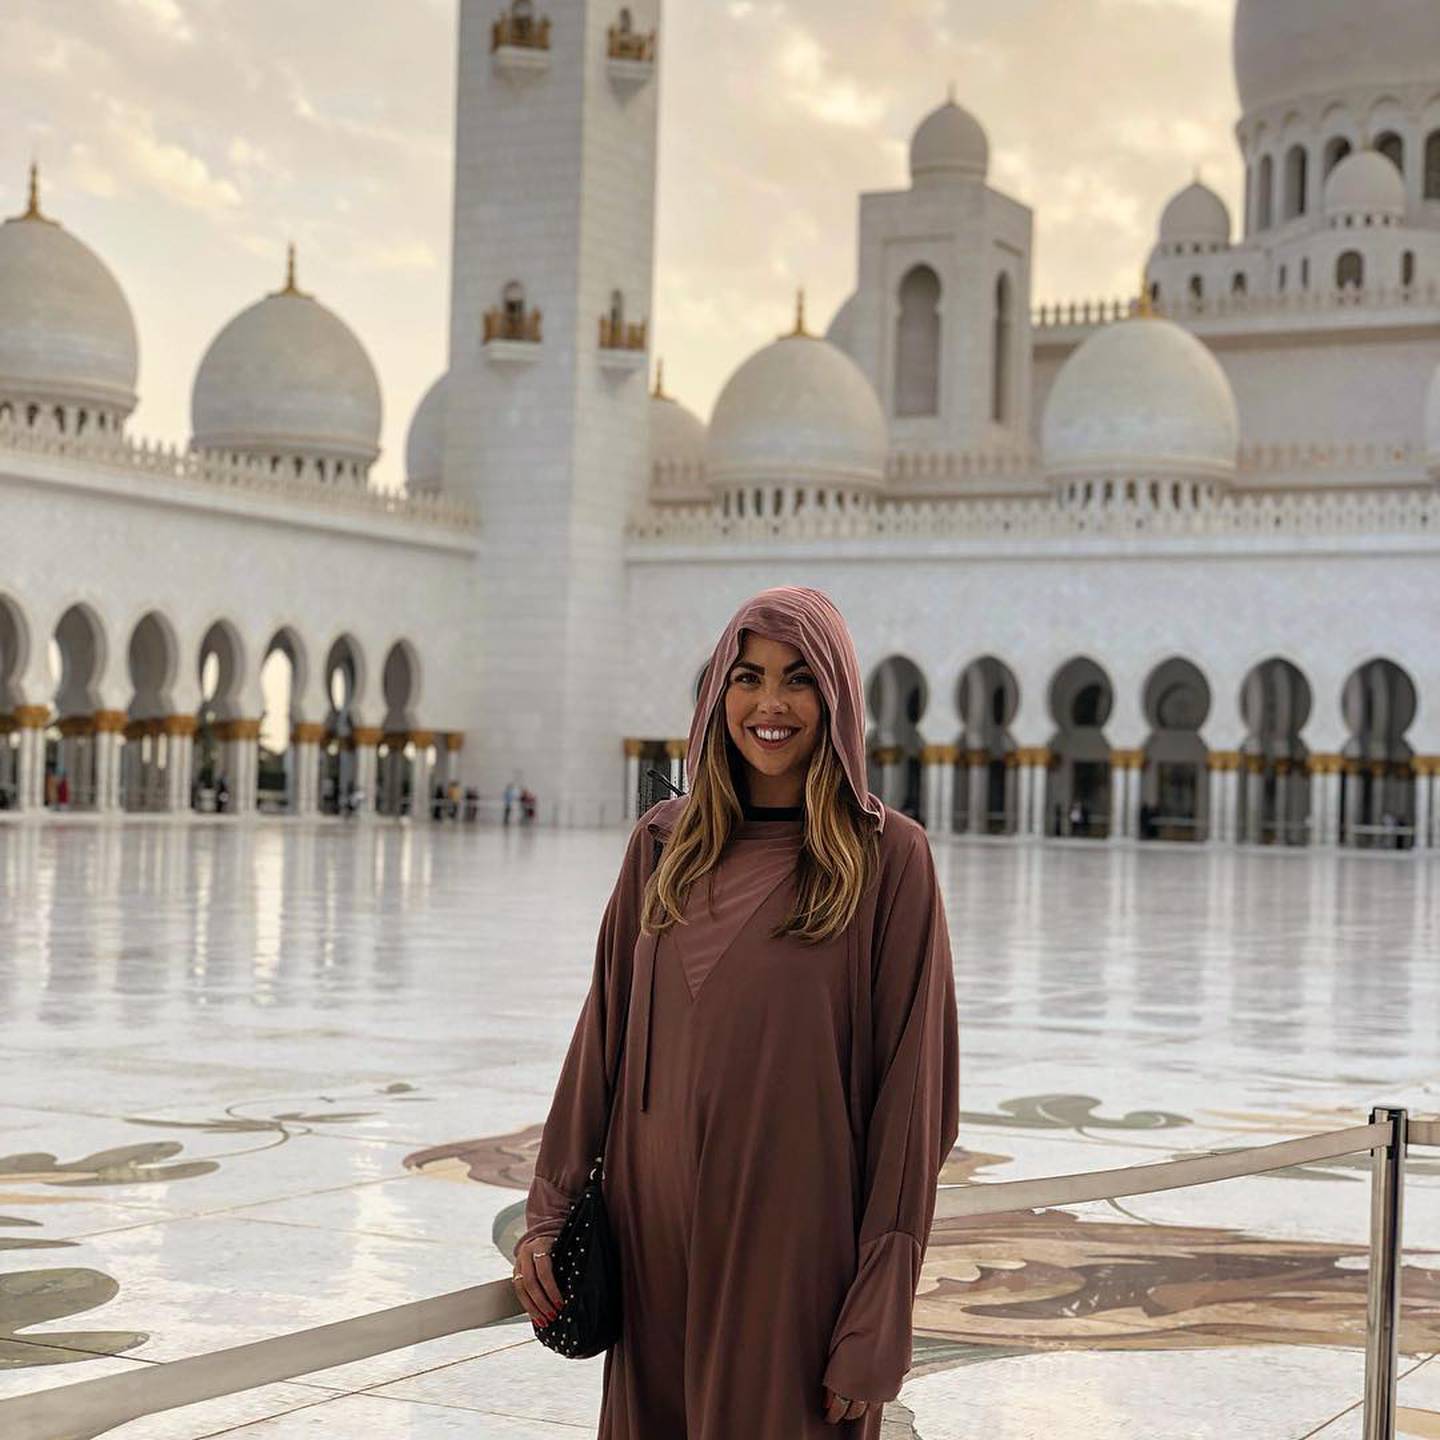 Sophie Prideaux visiting the Sheikh Zayed Mosque in Abu Dhabi. Photo: Sophie Prideaux